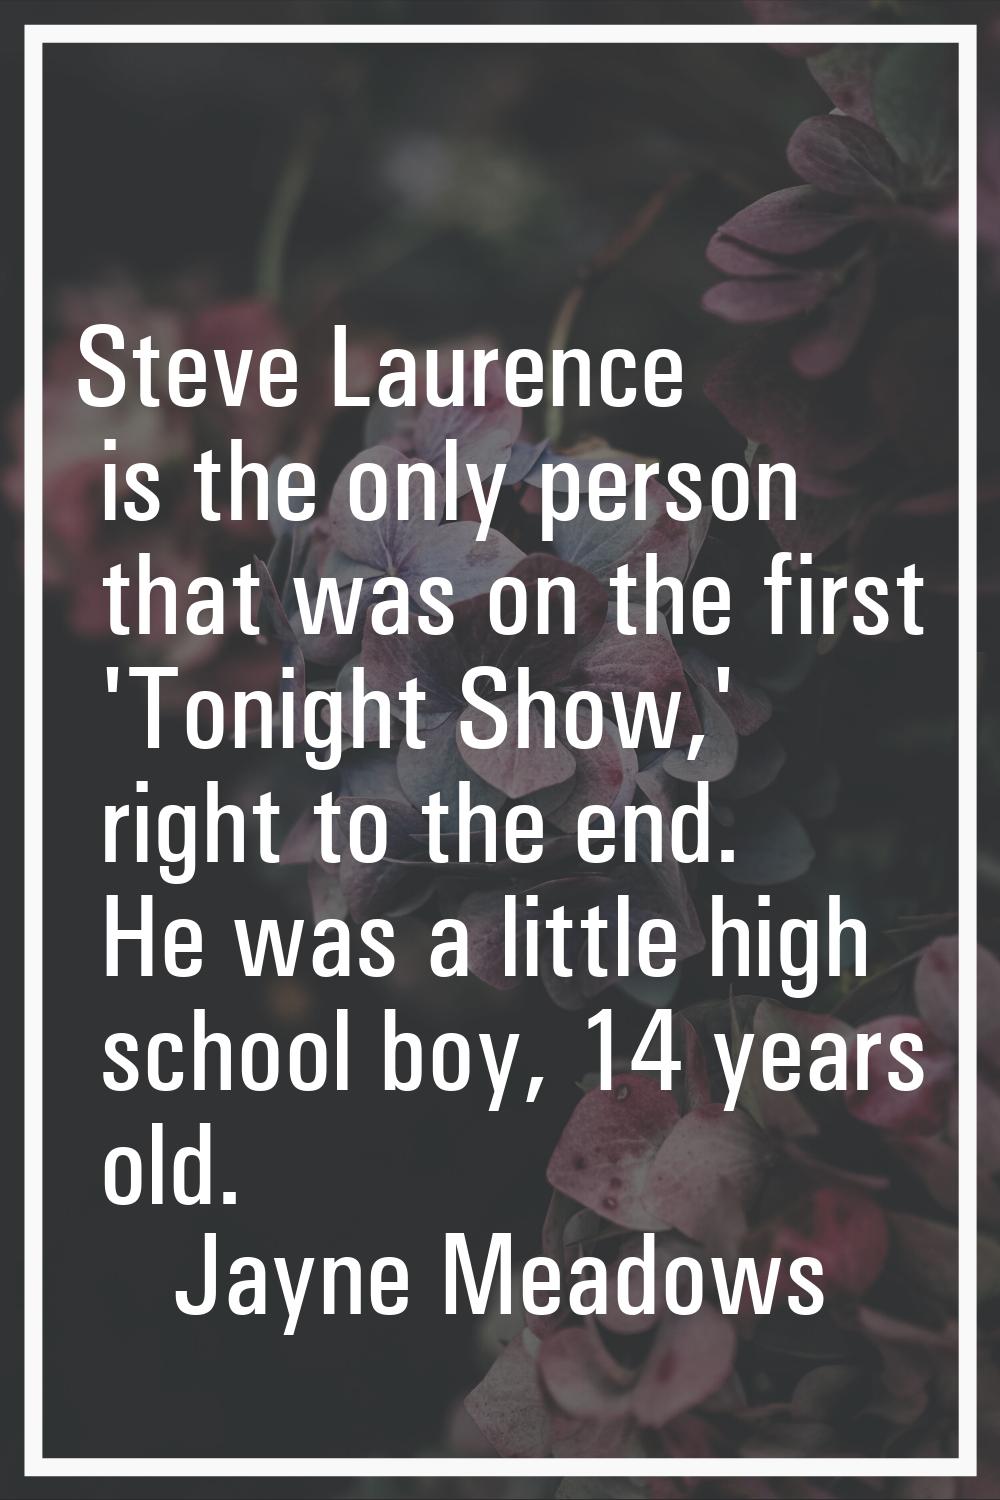 Steve Laurence is the only person that was on the first 'Tonight Show,' right to the end. He was a 